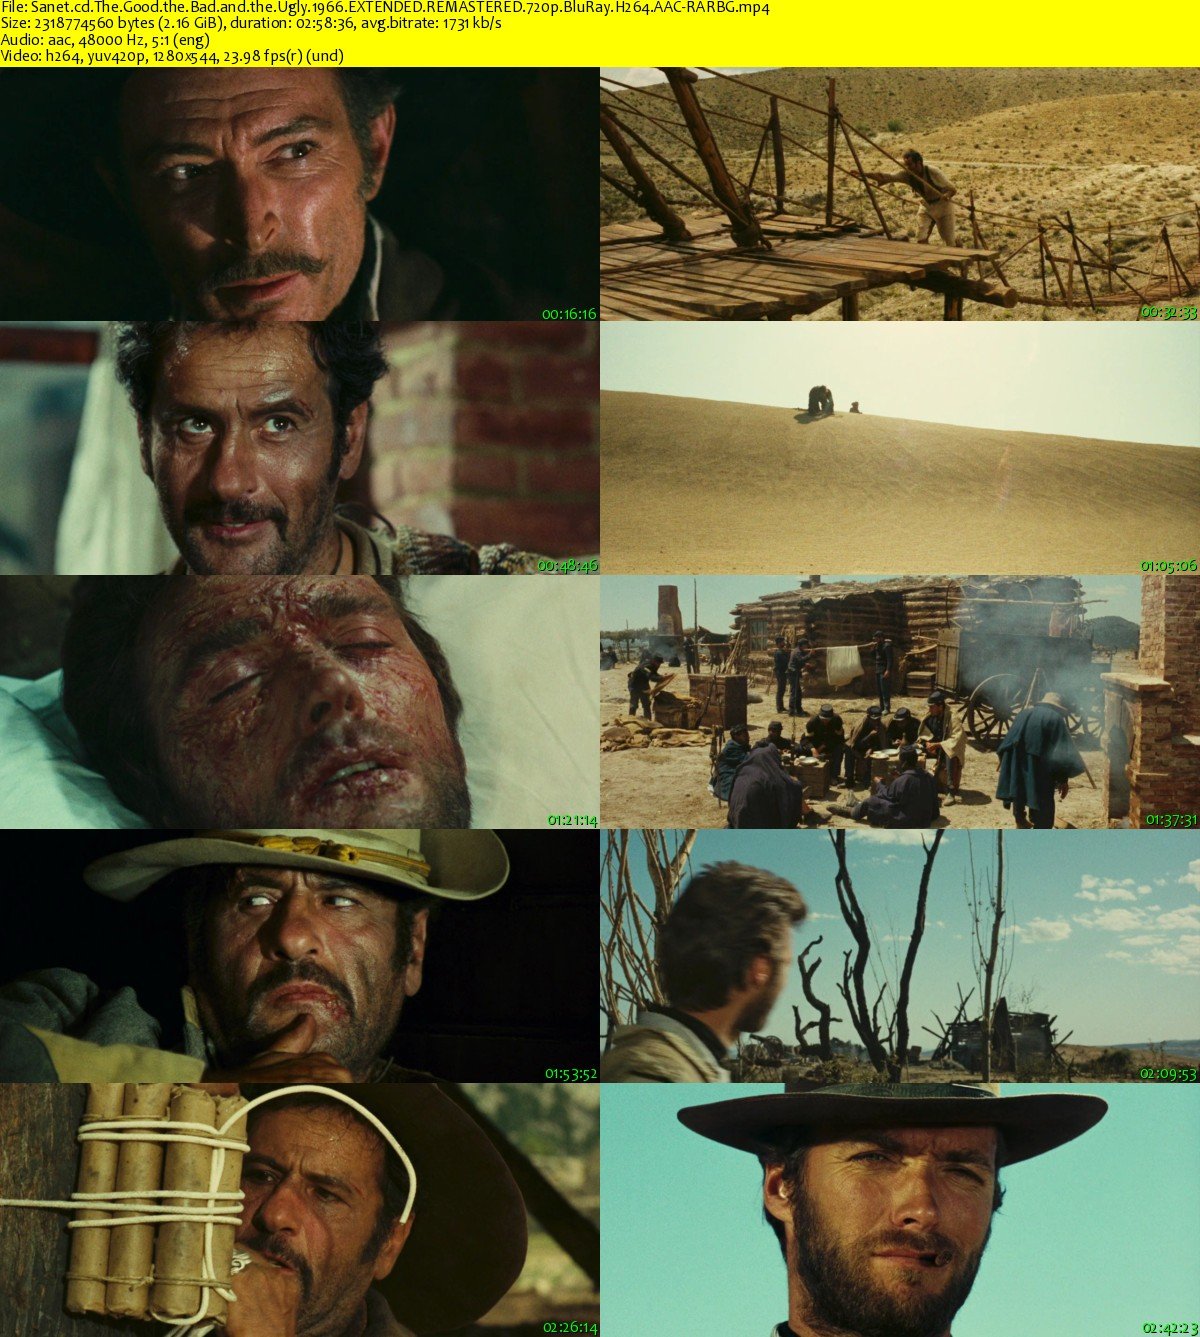 The Good the Bad and the Ugly 1966 EXTENDED REMASTERED 720p BluRay H264 AAC...